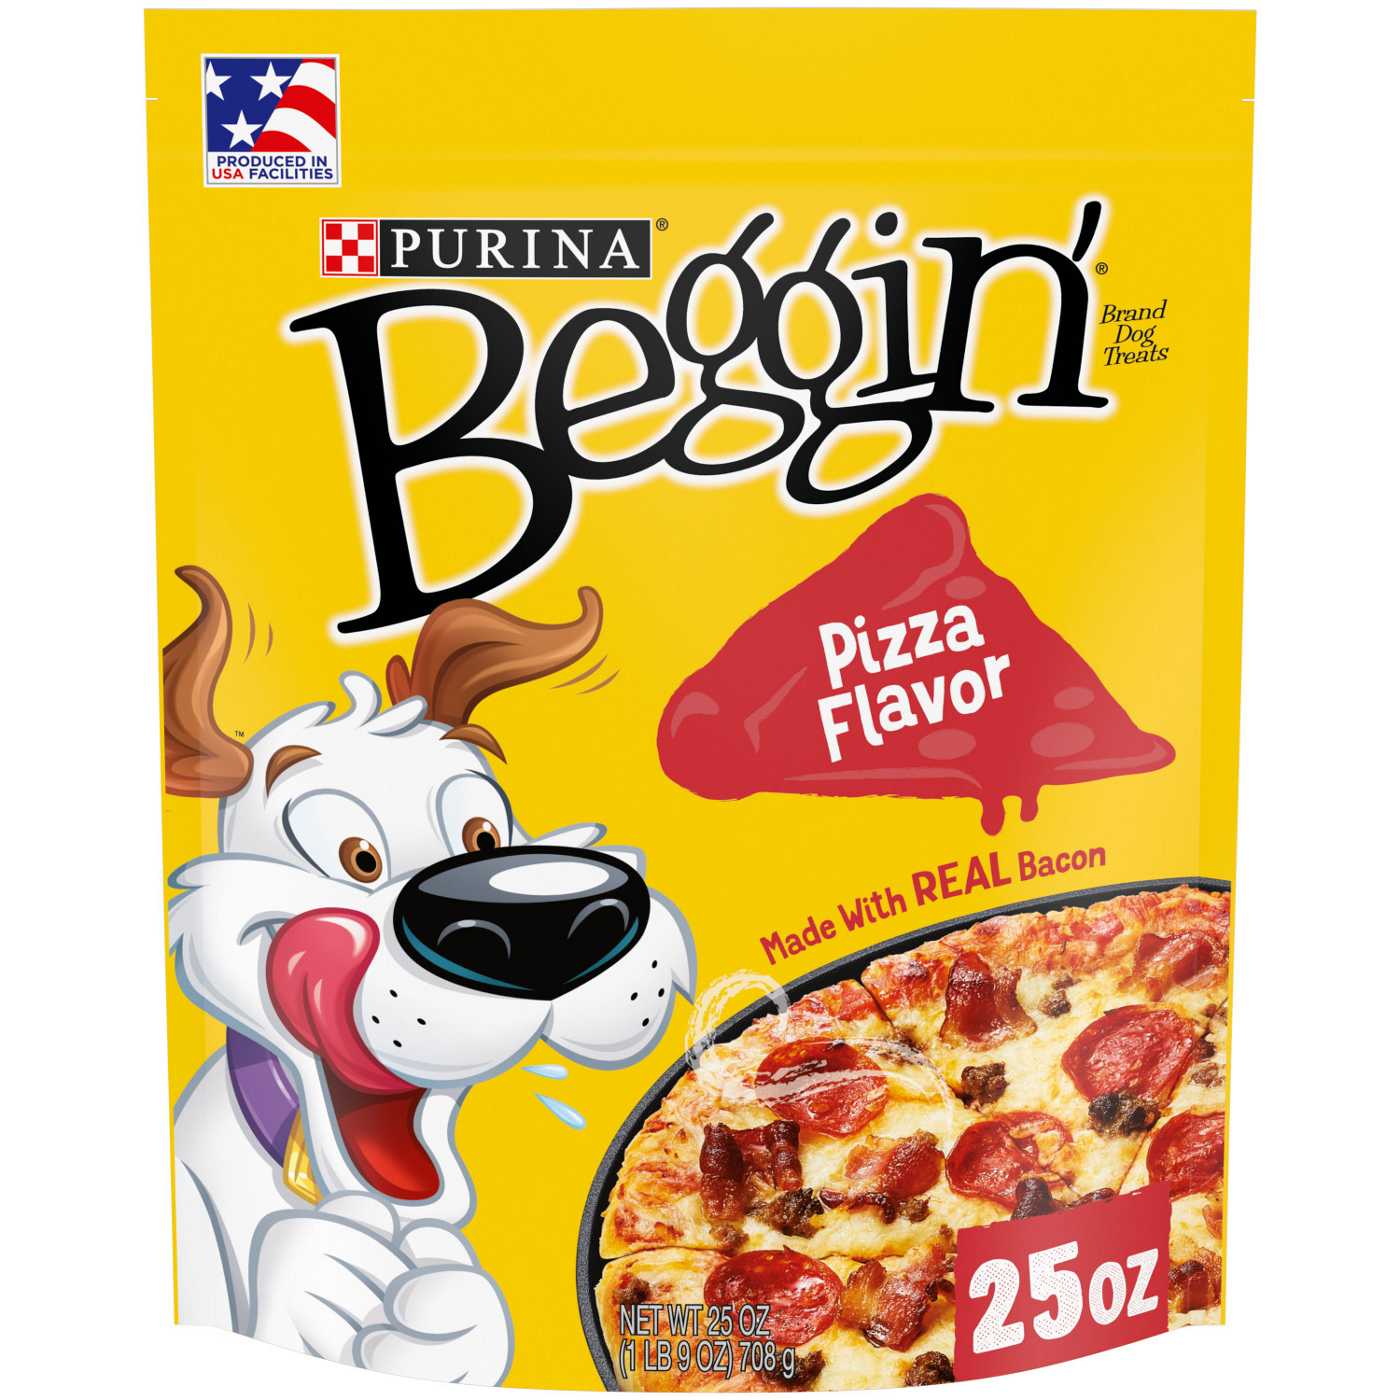 Beggin' Purina Beggin' Dog Treats With Real Bacon, Pizza Flavor; image 1 of 7